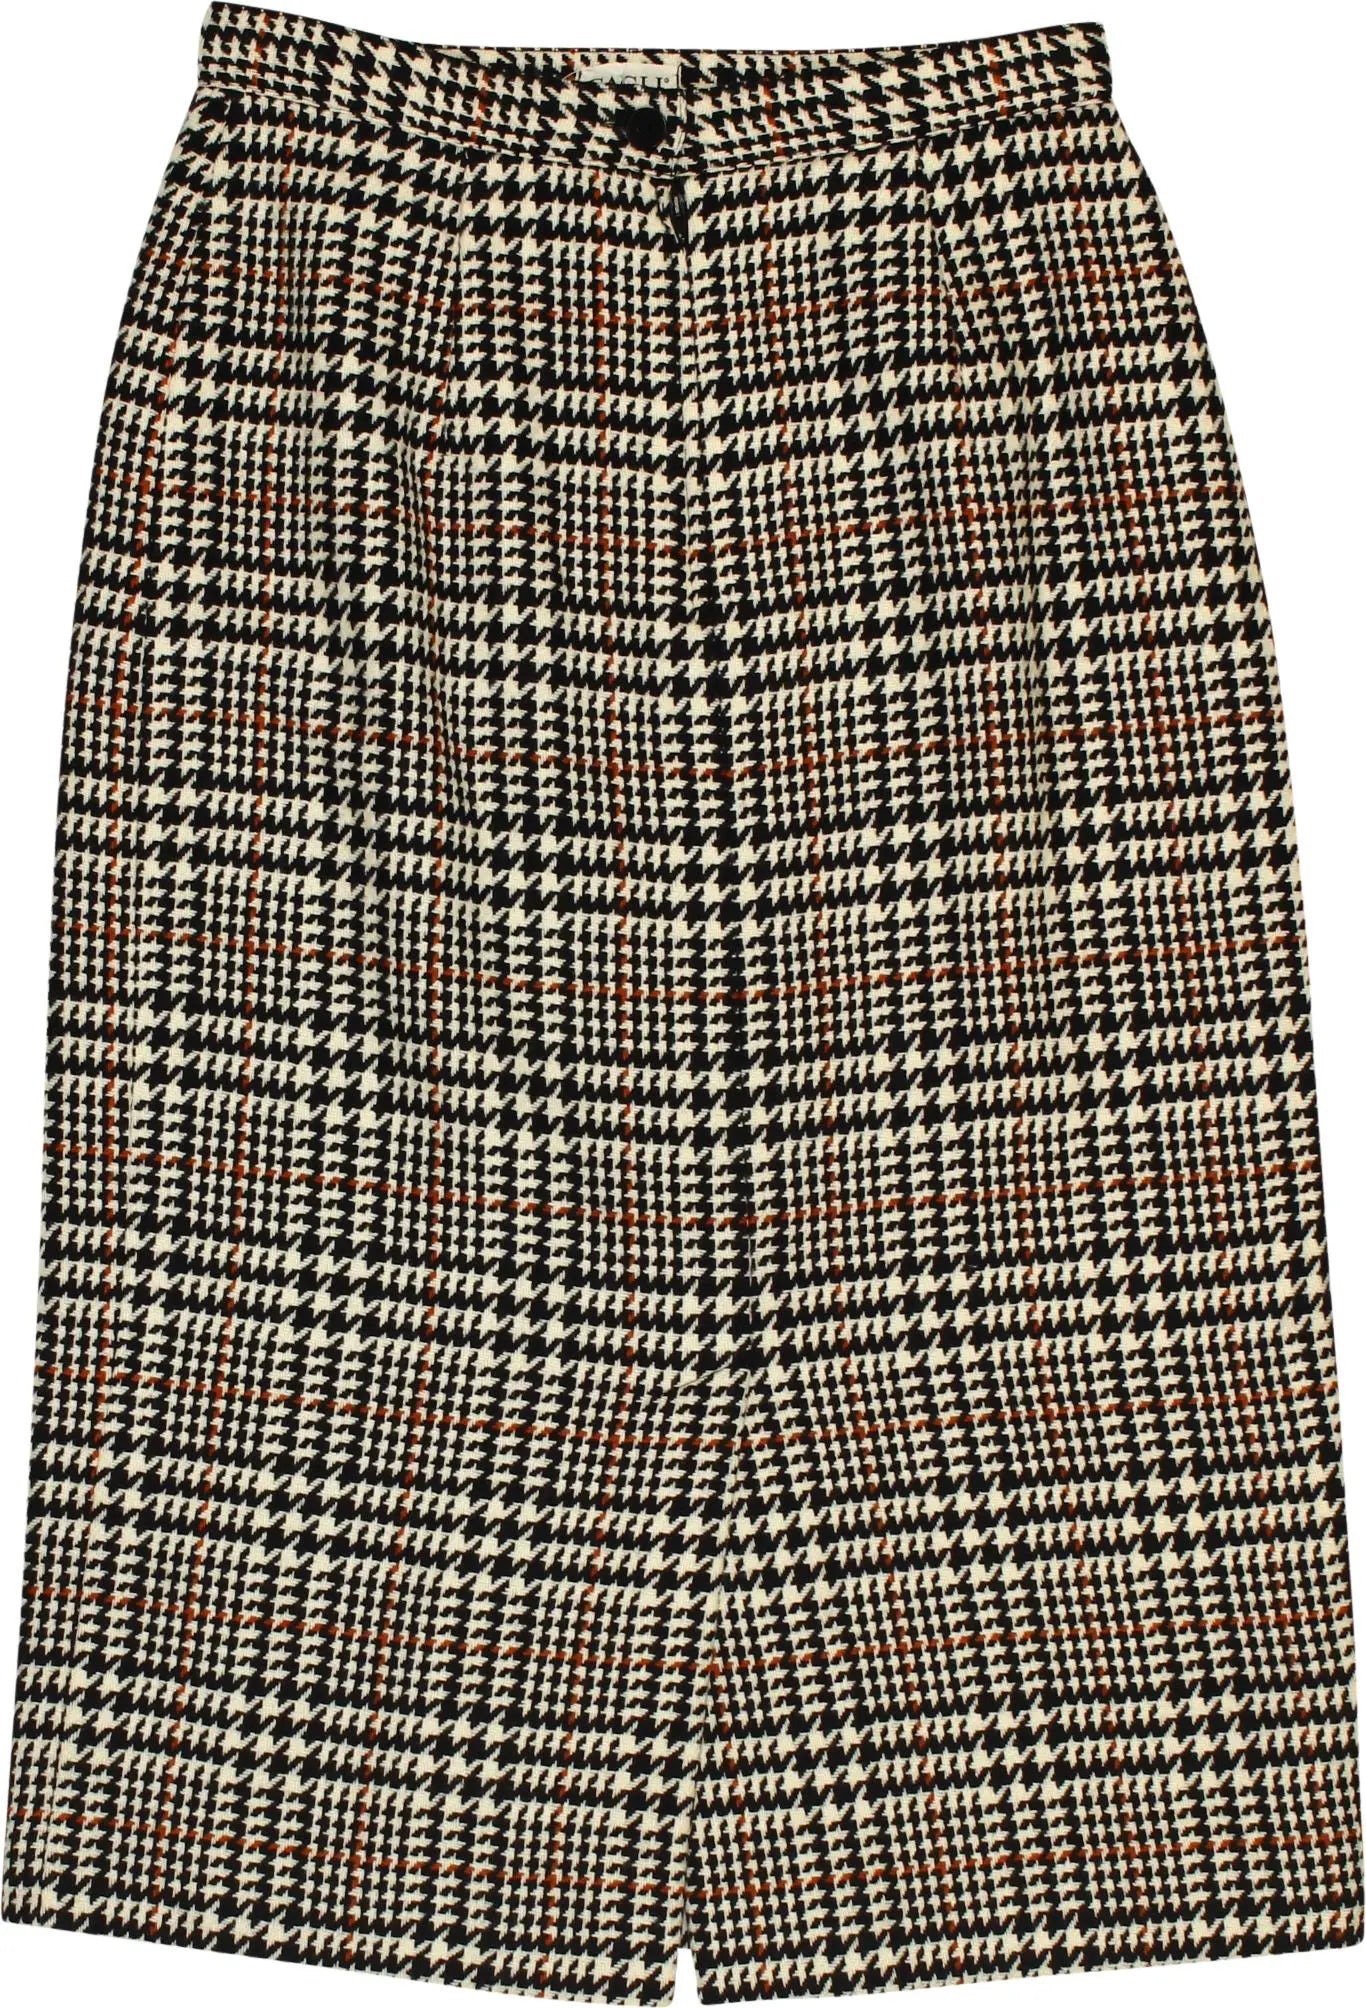 Unknown - Checked Wool Skirt- ThriftTale.com - Vintage and second handclothing